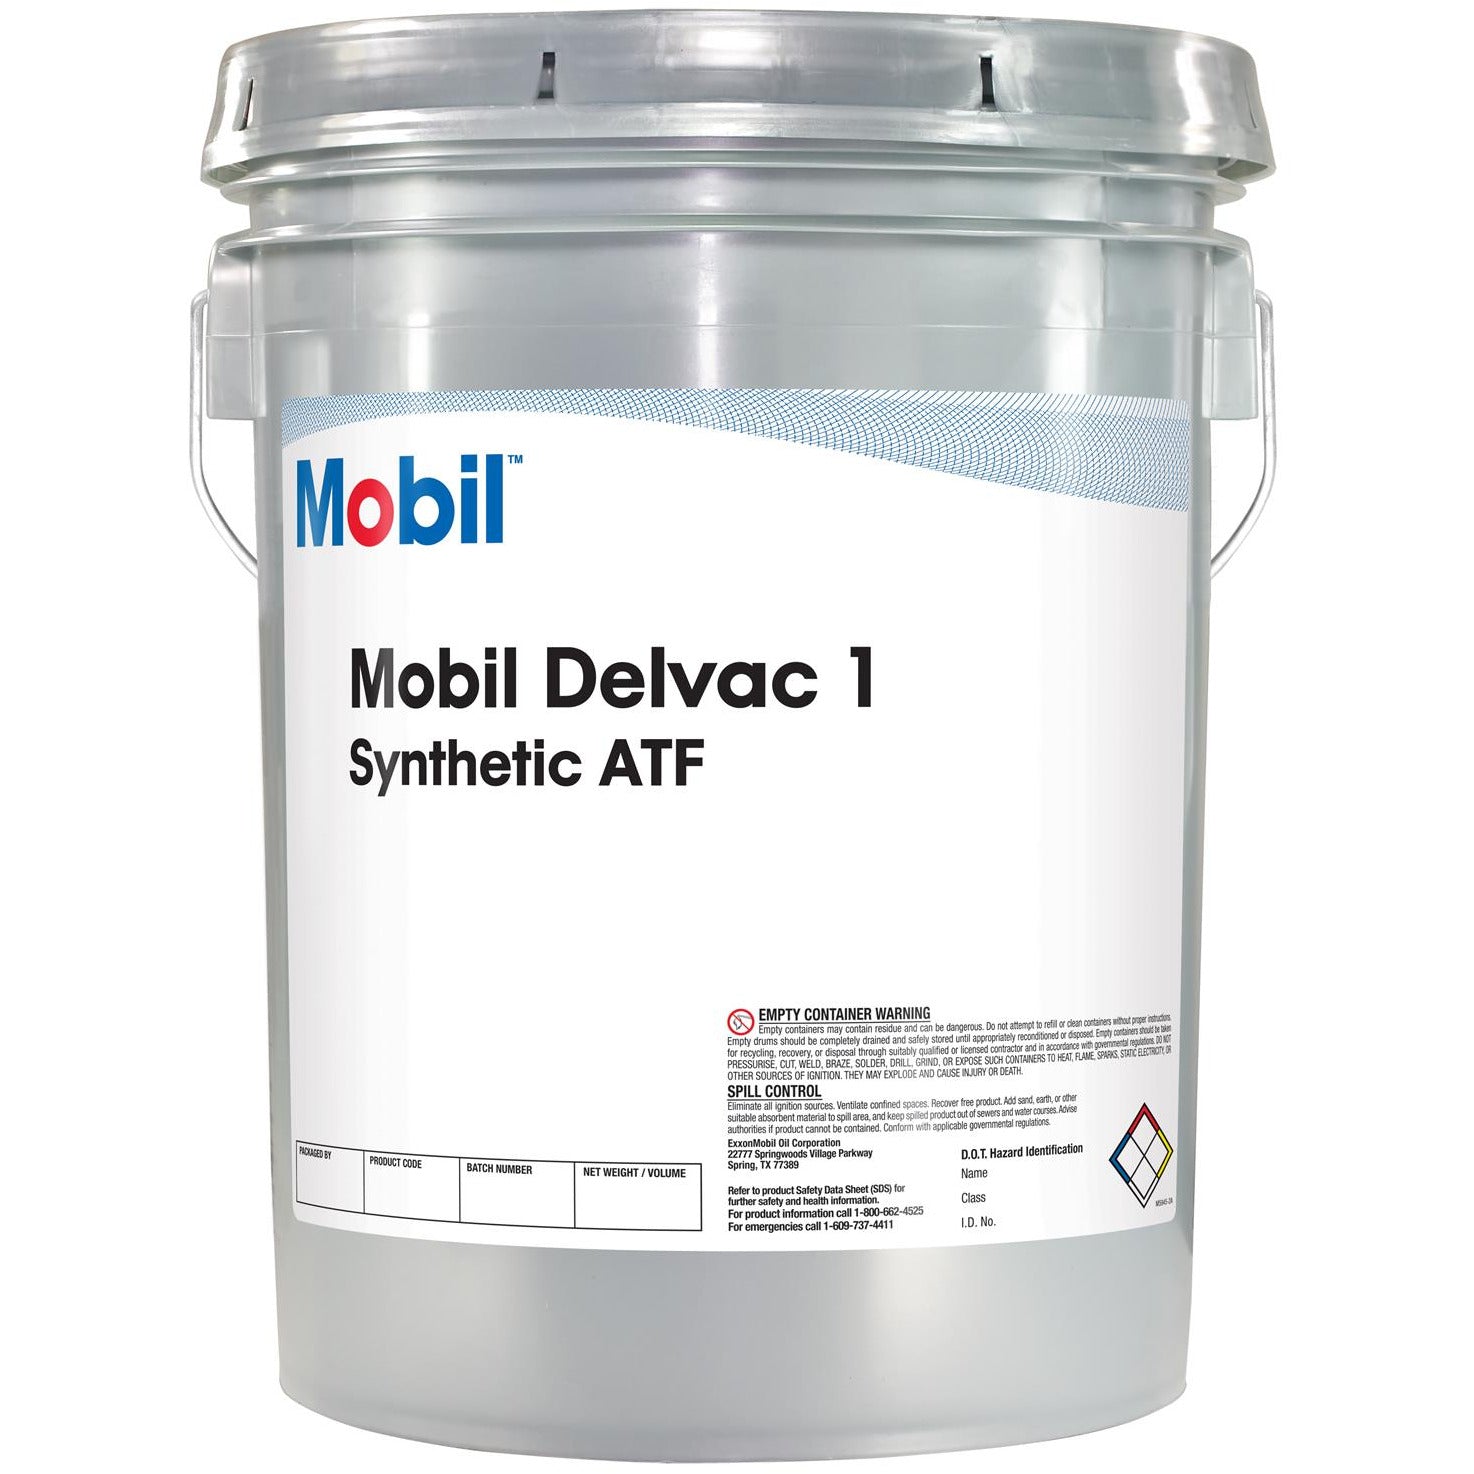 XMO 122058 Mobil Delvac 1 Synthetic ATF 5 Gal